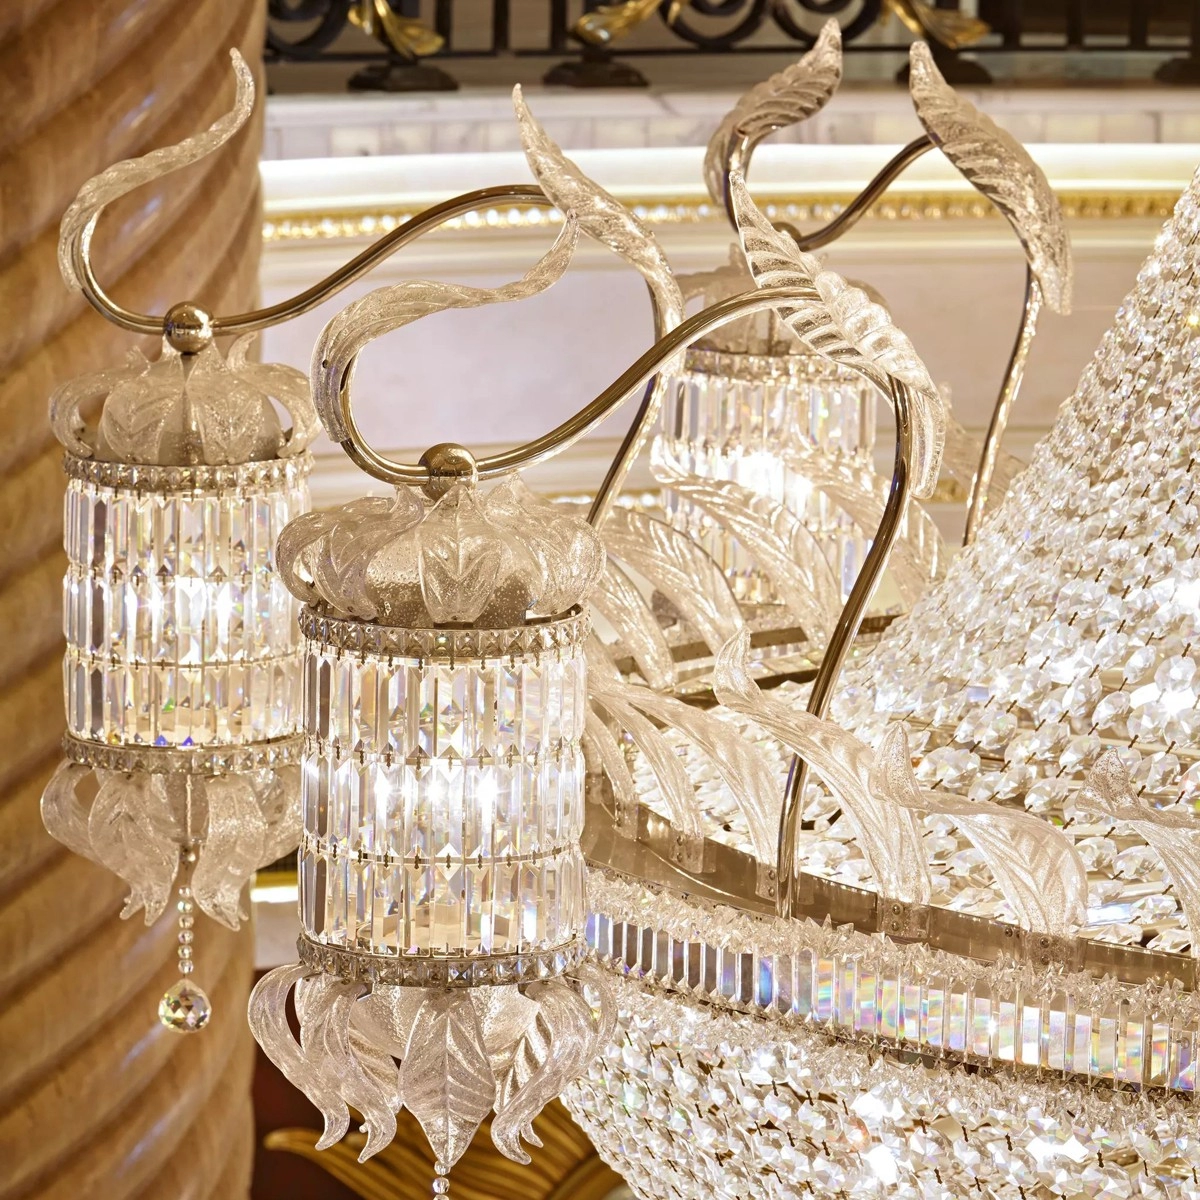 Giant eimpre crystal chandelier with glass leaves